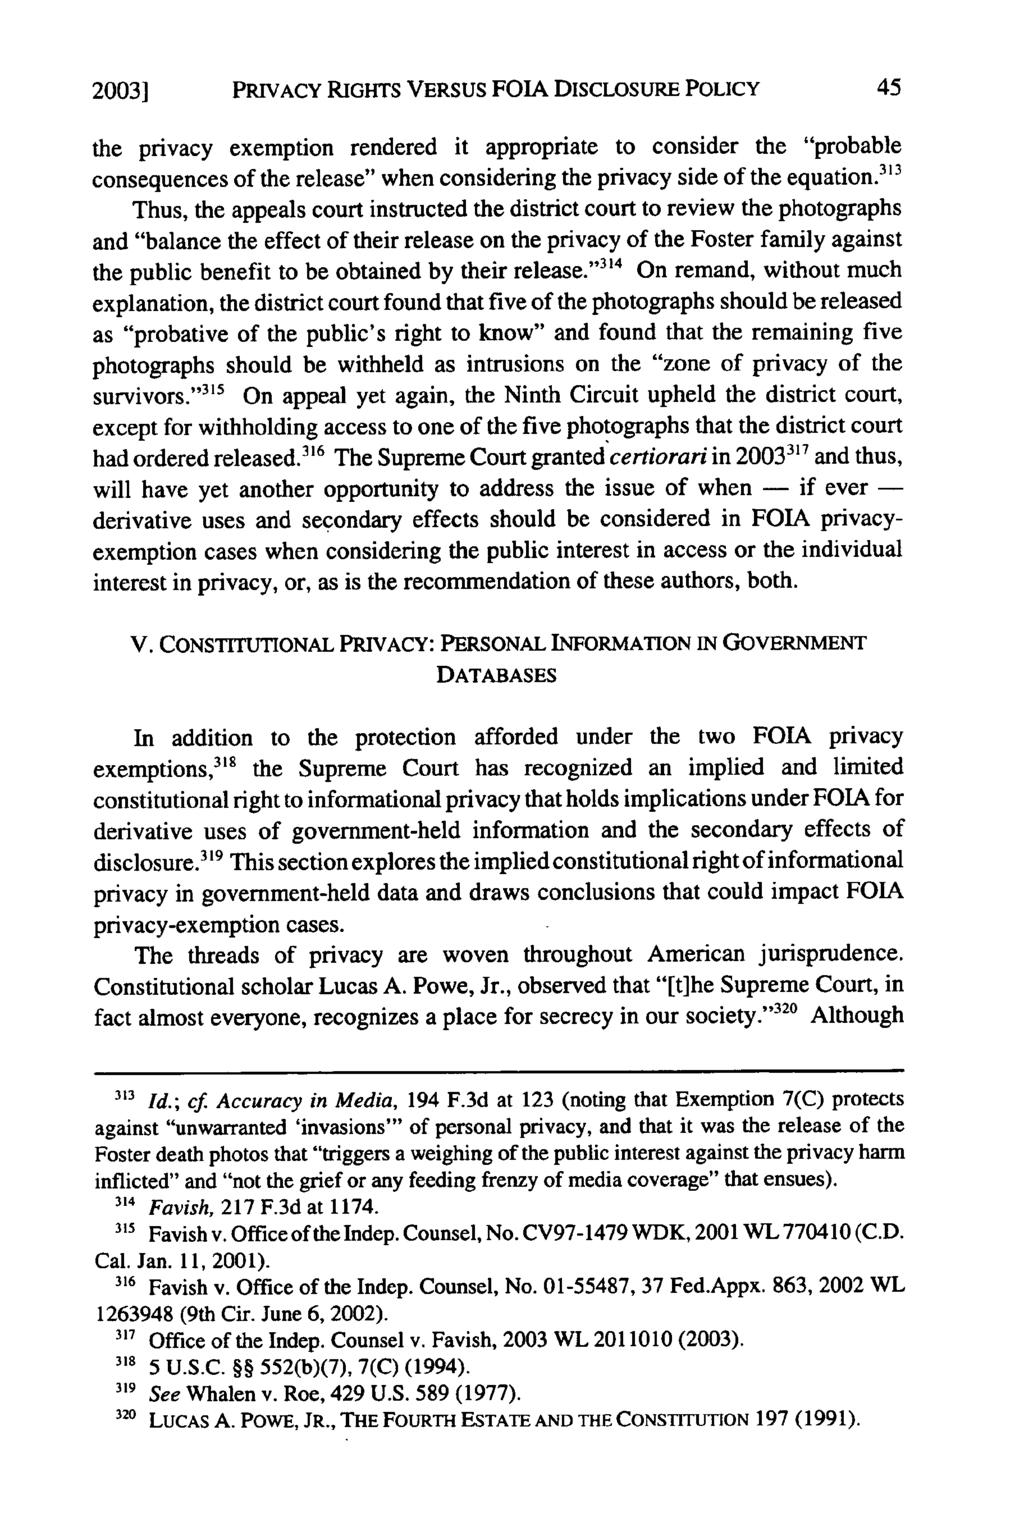 2003] PRIVACY RIGHTS VERSUS FOIA DISCLOSURE POLICY the privacy exemption rendered it appropriate to consider the "probable consequences of the release" when considering the privacy side of the